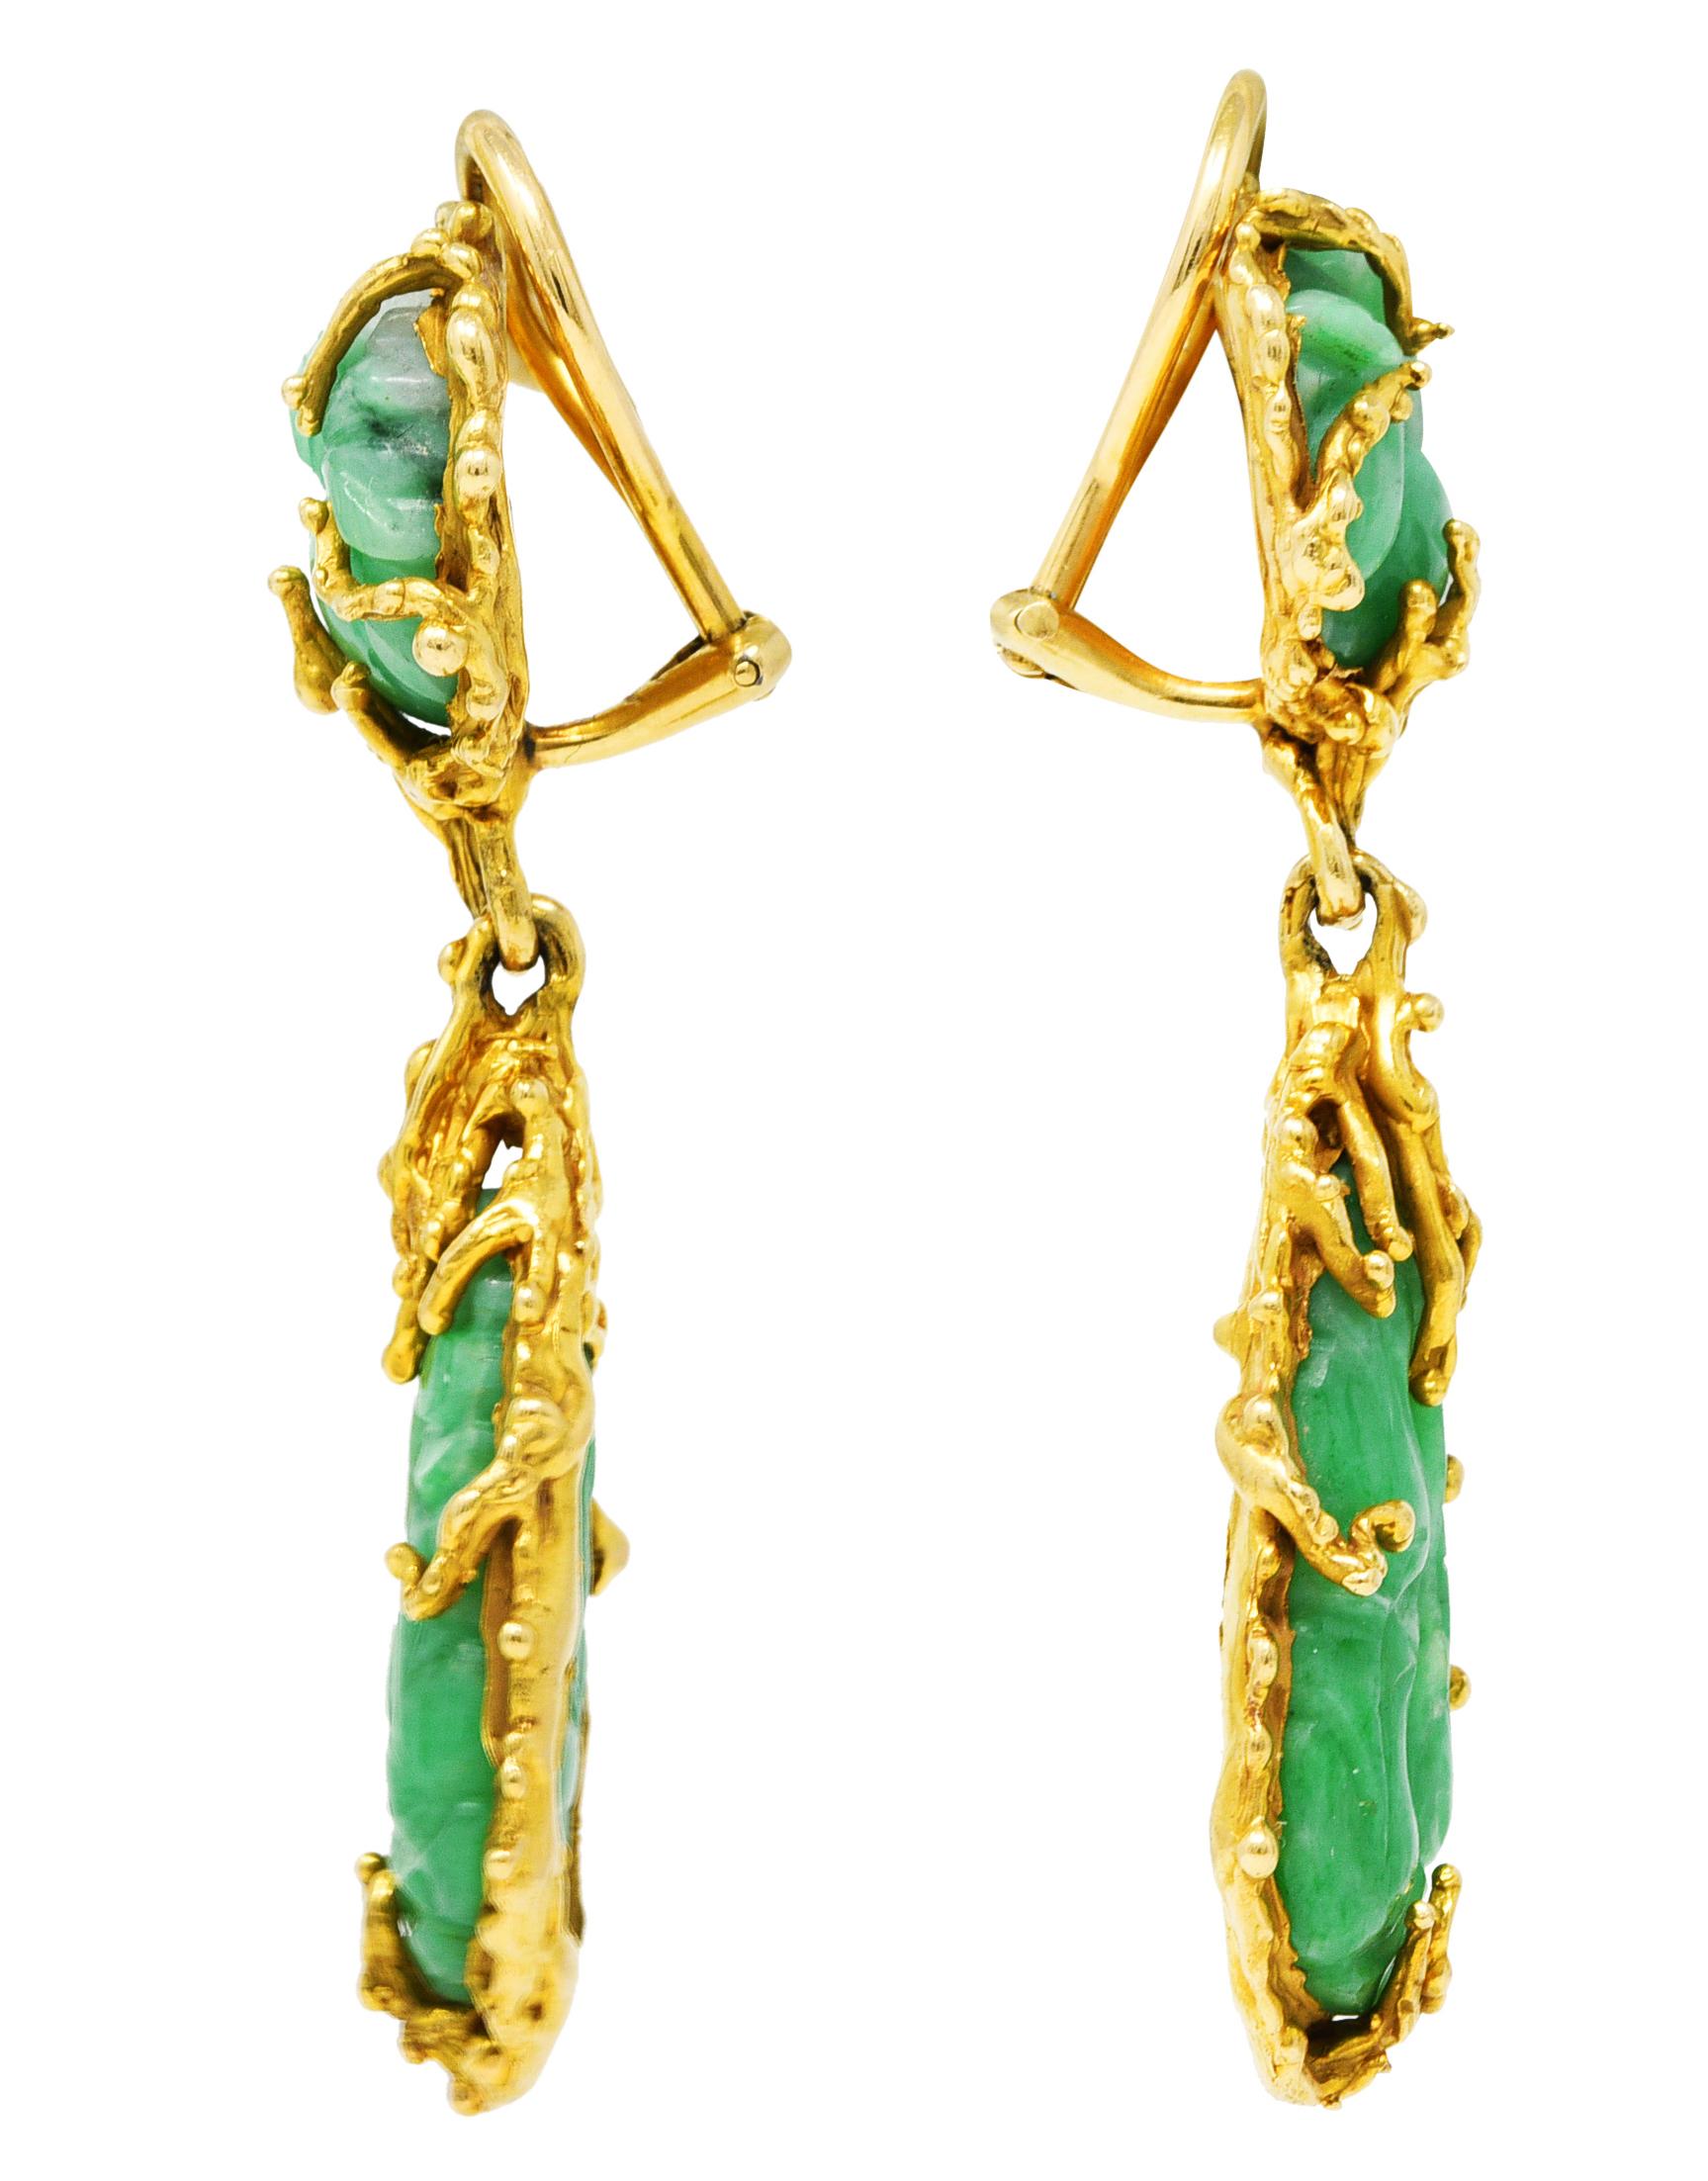 Earrings are comprised of jade surmounts and drops - carved to depict foliate and fruit. Semi-translucent green with light to medium saturation and white swirling throughout. Prong set and measuring 13.0 x 13.5 mm and 12.5 x 22.0 mm, respectively.